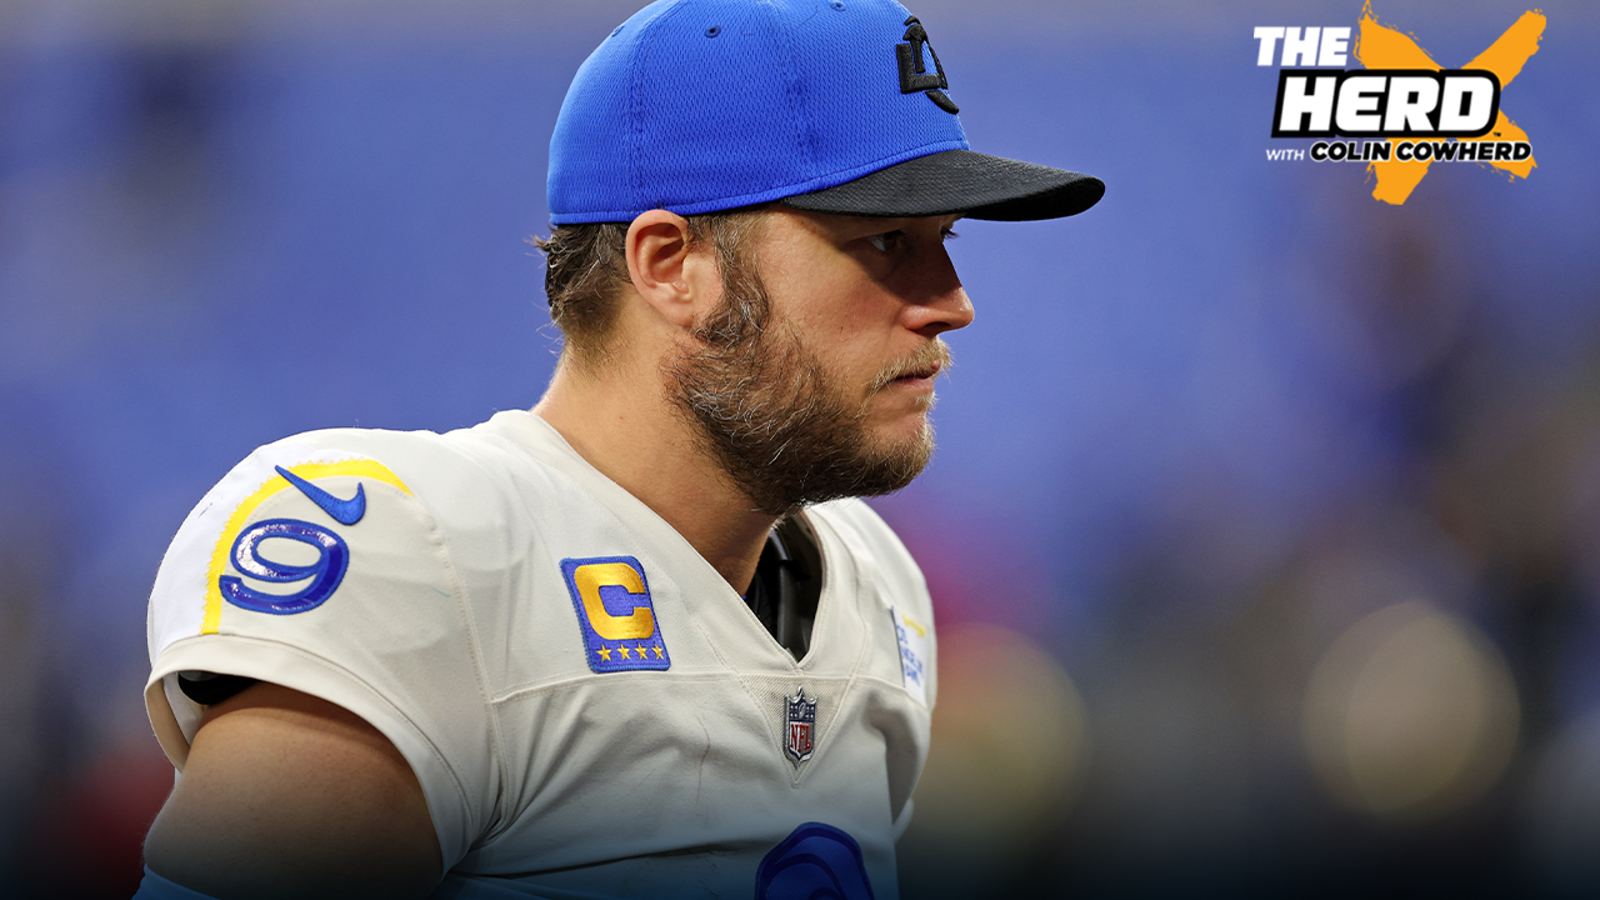 Colin Cowherd: "Let's stop beating up on Matthew Stafford"